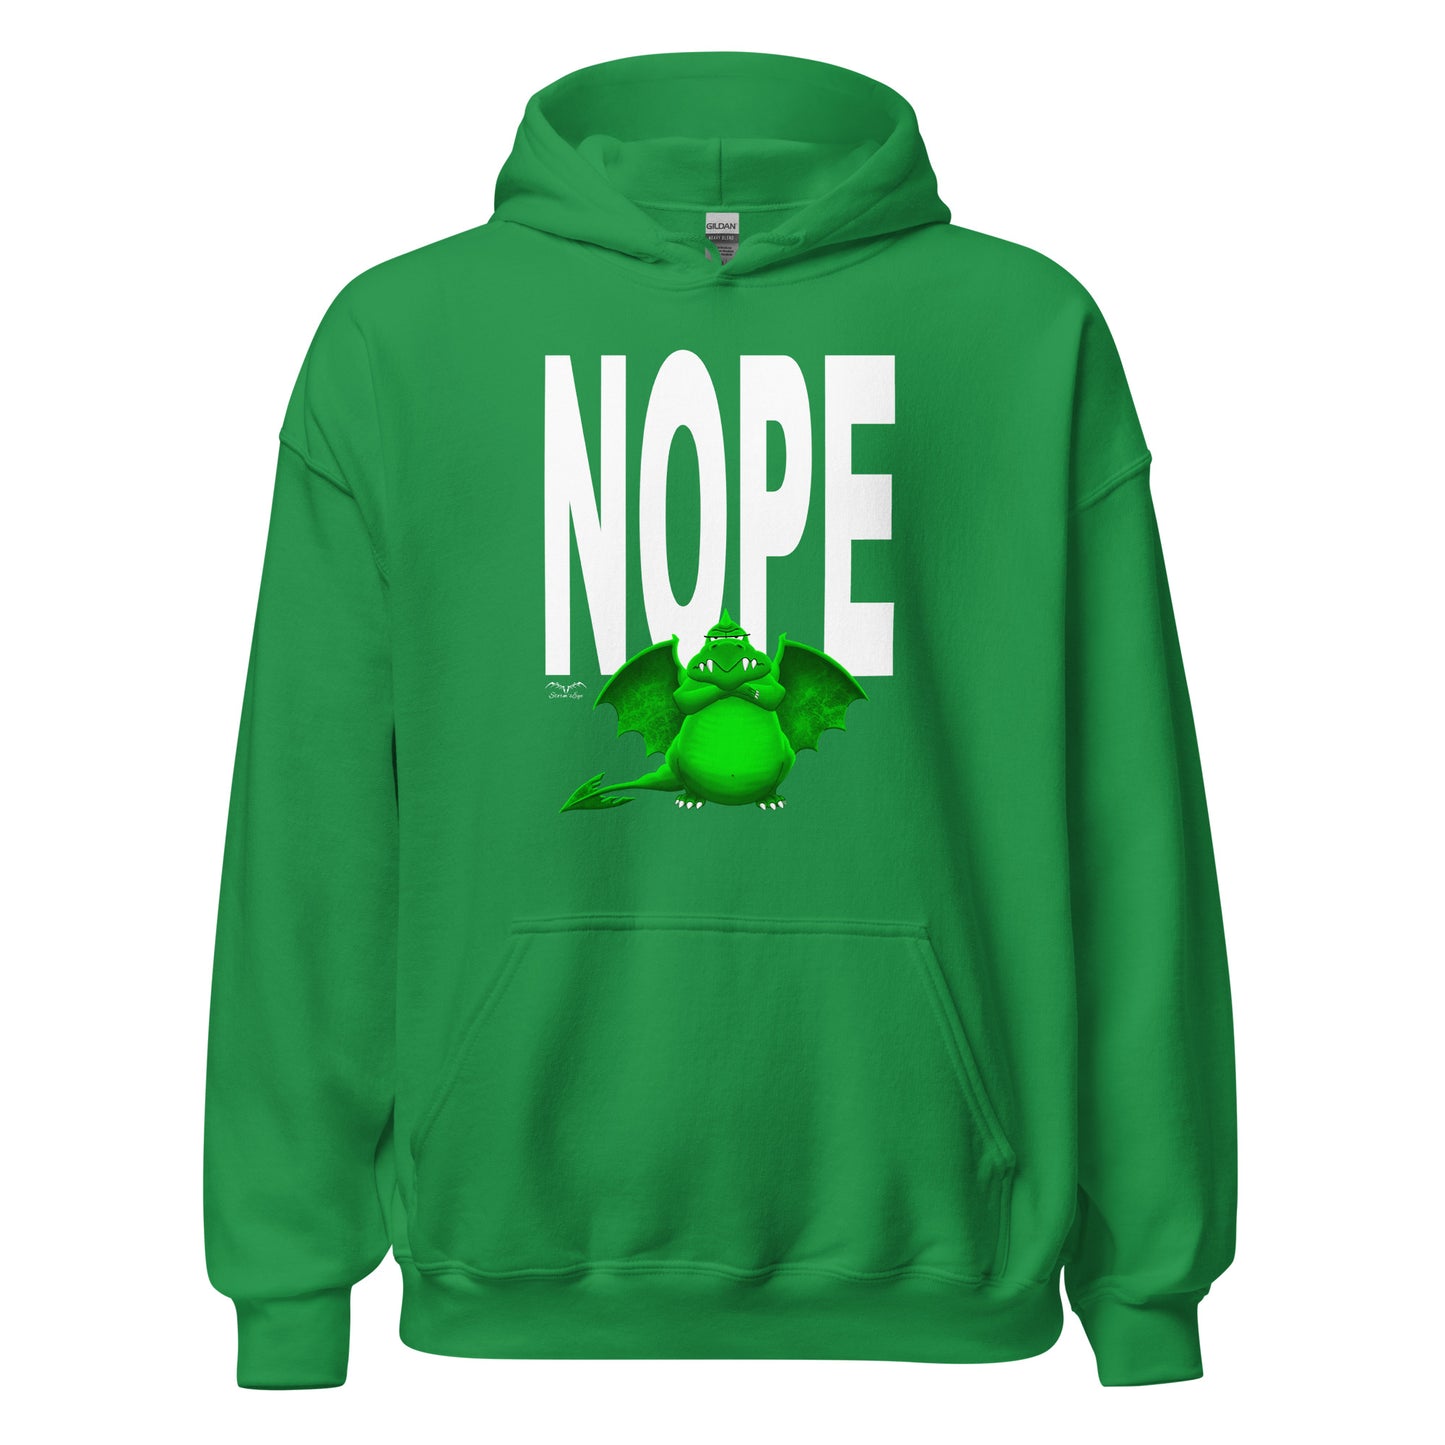 nope dragon bouncer hoodie, bright green, by Stormseye Design